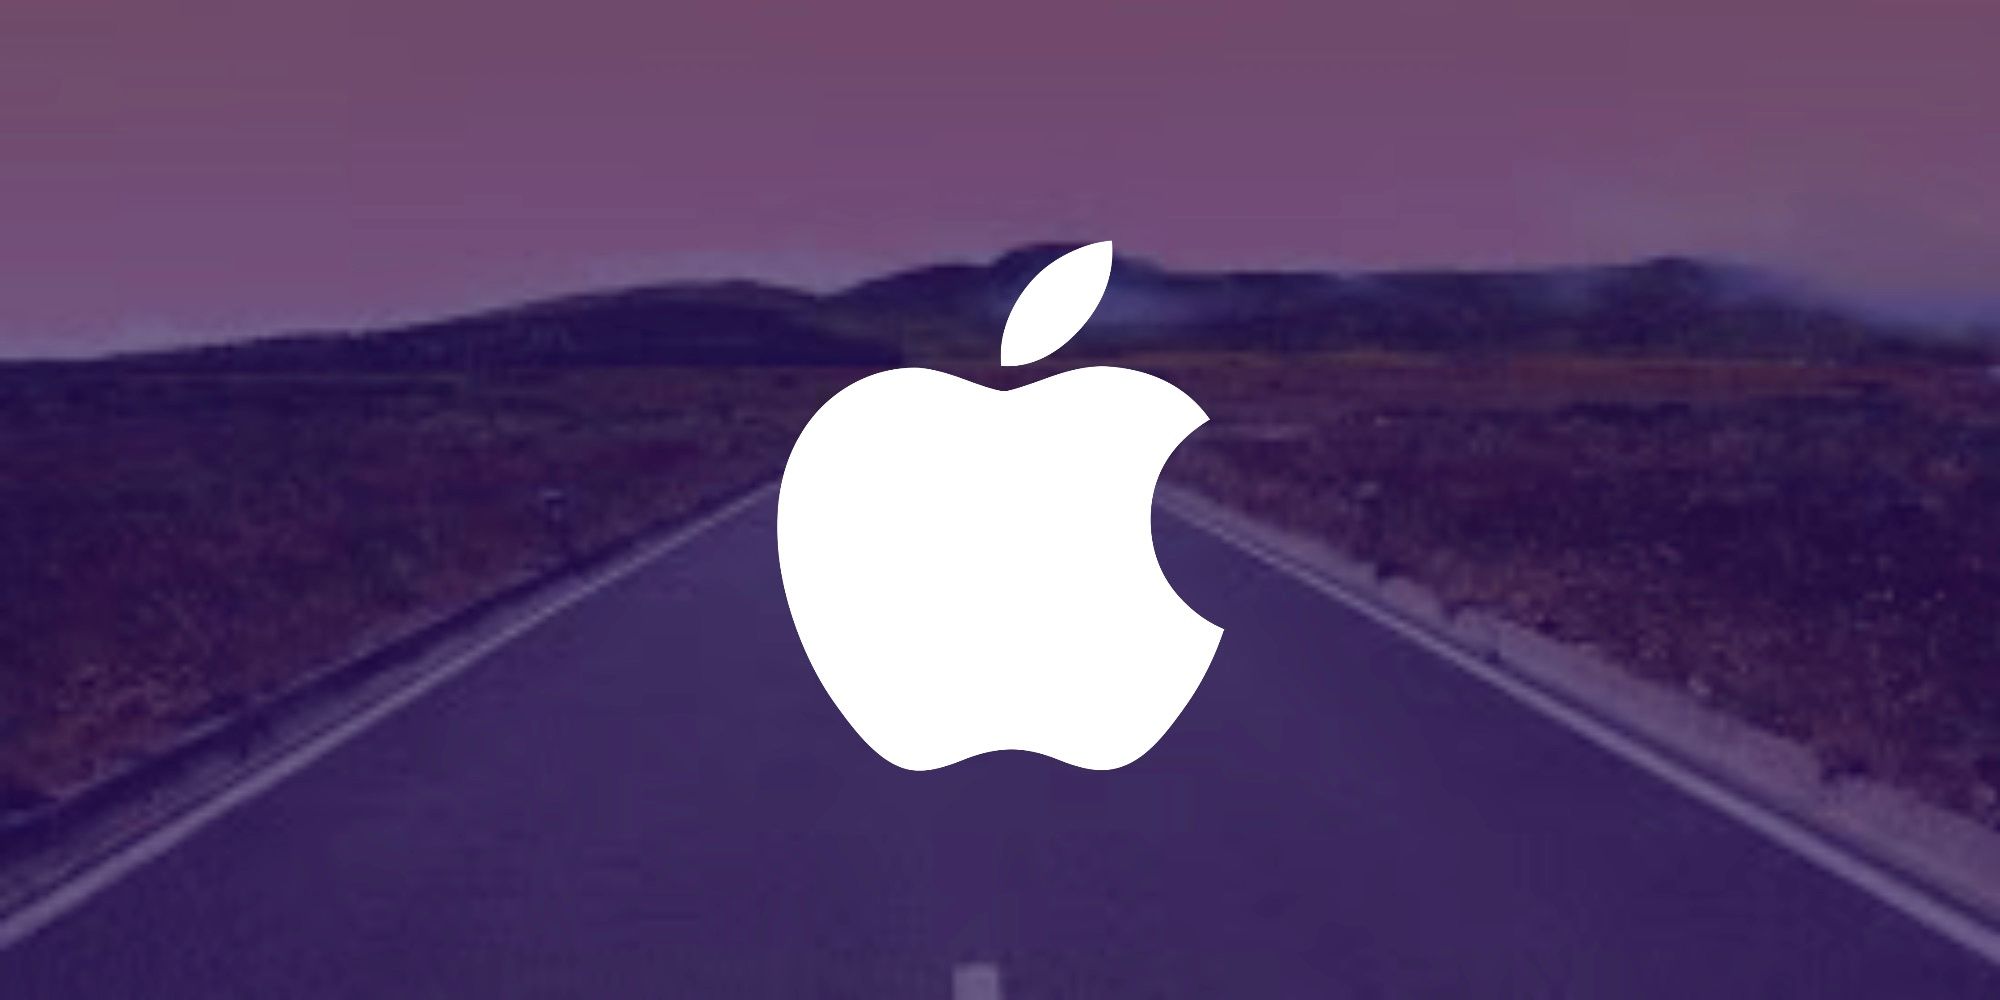 Okay, What The Heck Is Going On With The Apple Car Project?